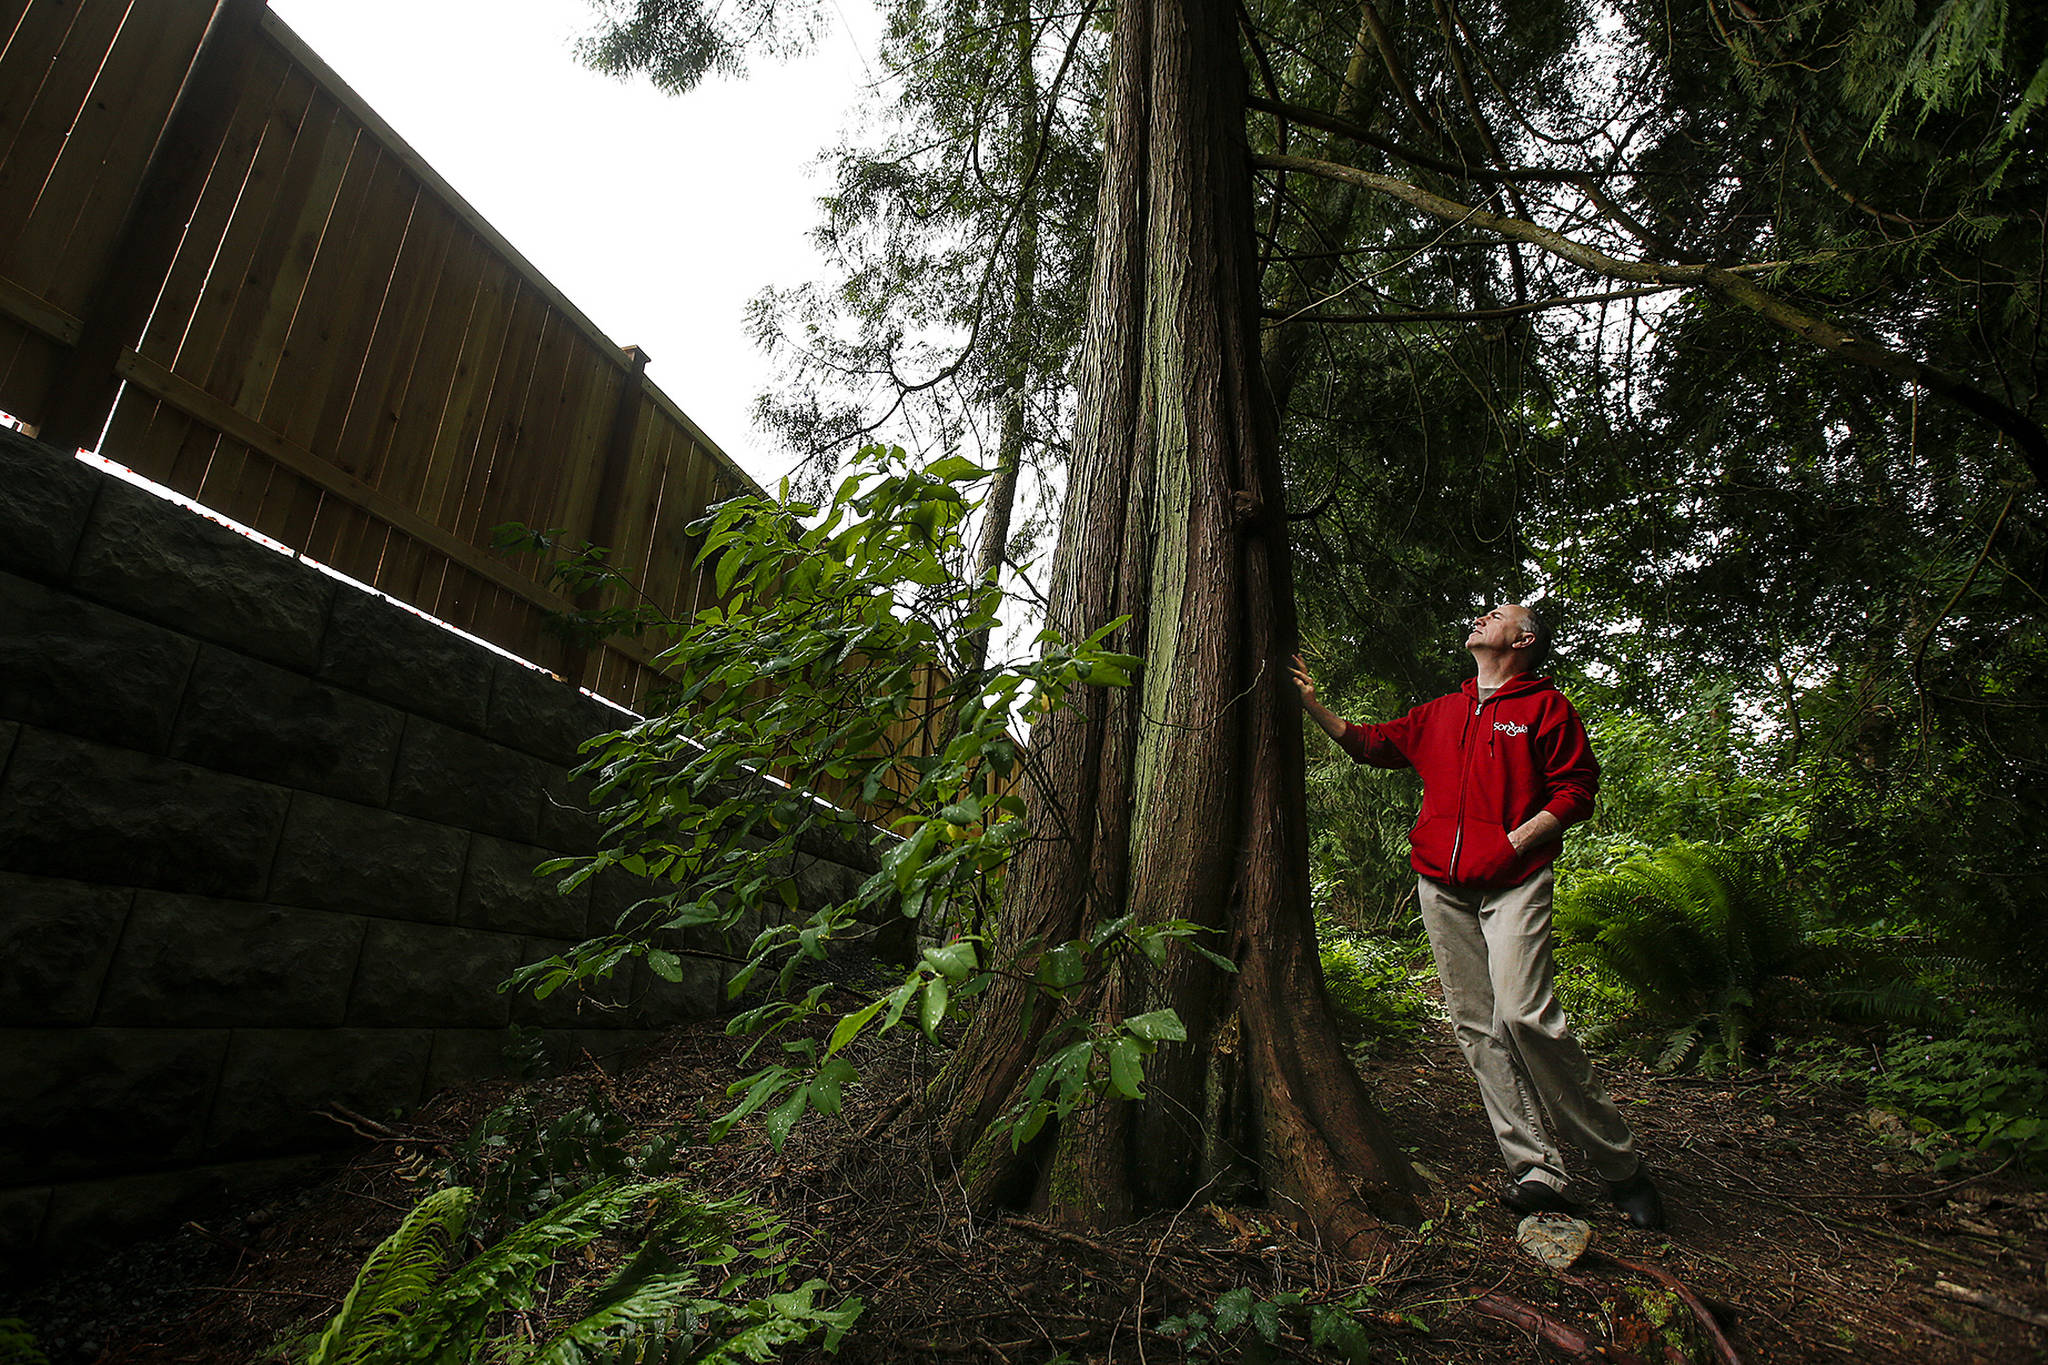 Ian Terry / The Herald Songaia resident Brian Bansenauer looks up at a Western red-cedar tree growing near the property line seperating the cohousing community from the new Crestmont Place 25-lot development in Bothell on Thursday, June 1. Bansenauer and others from the Songaia community worked with developers to help save the tree pictured as well as many others in the area. Photo taken on 06012017